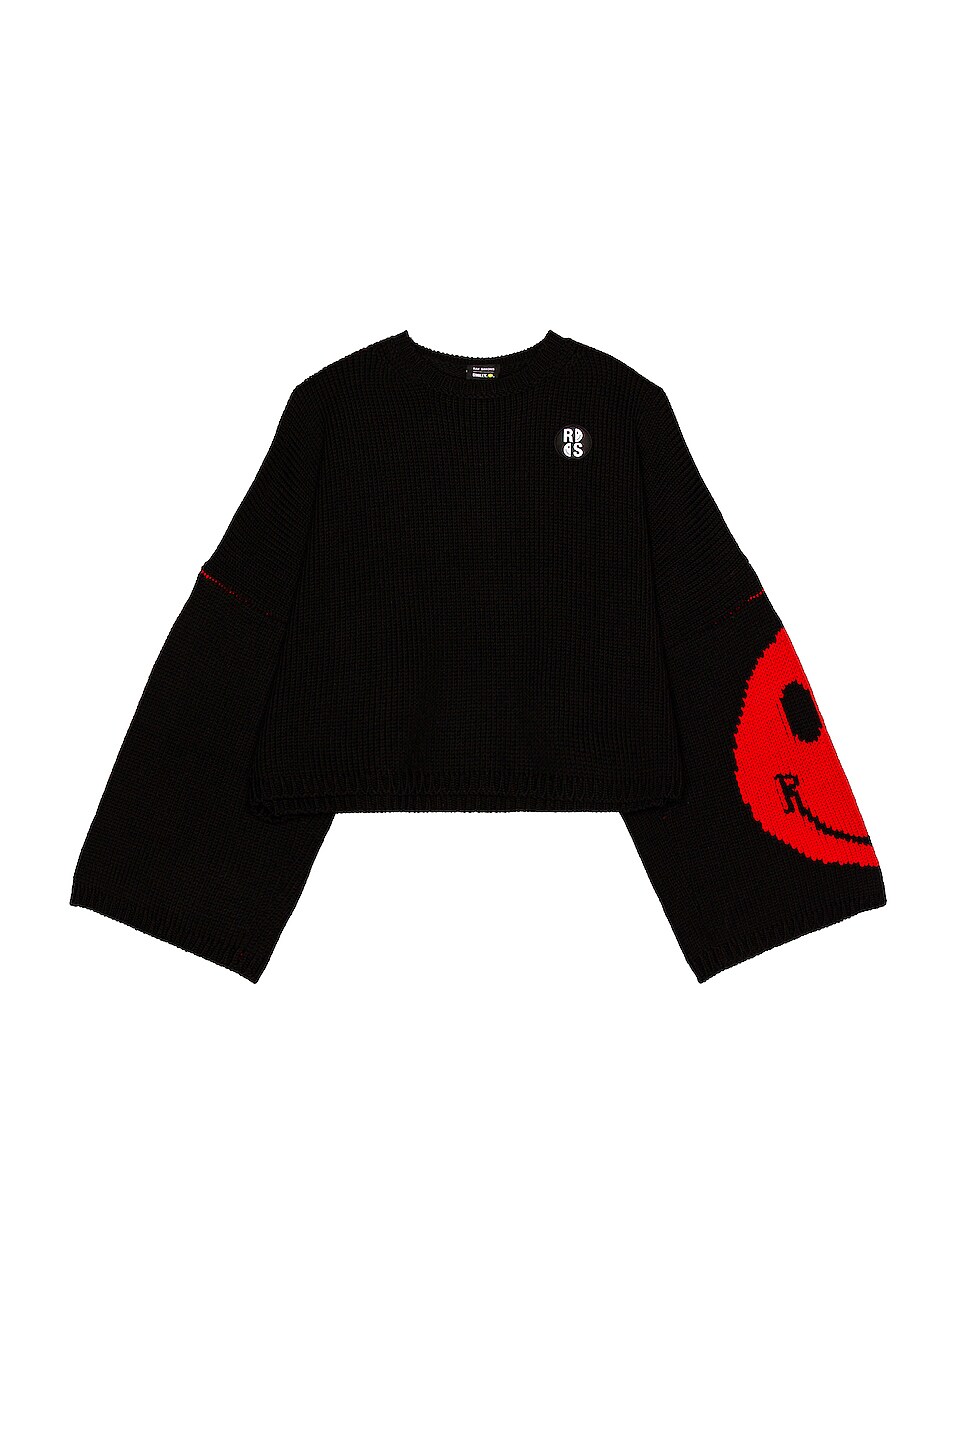 Image 1 of Raf Simons x Smiley Knit Sweater in Black